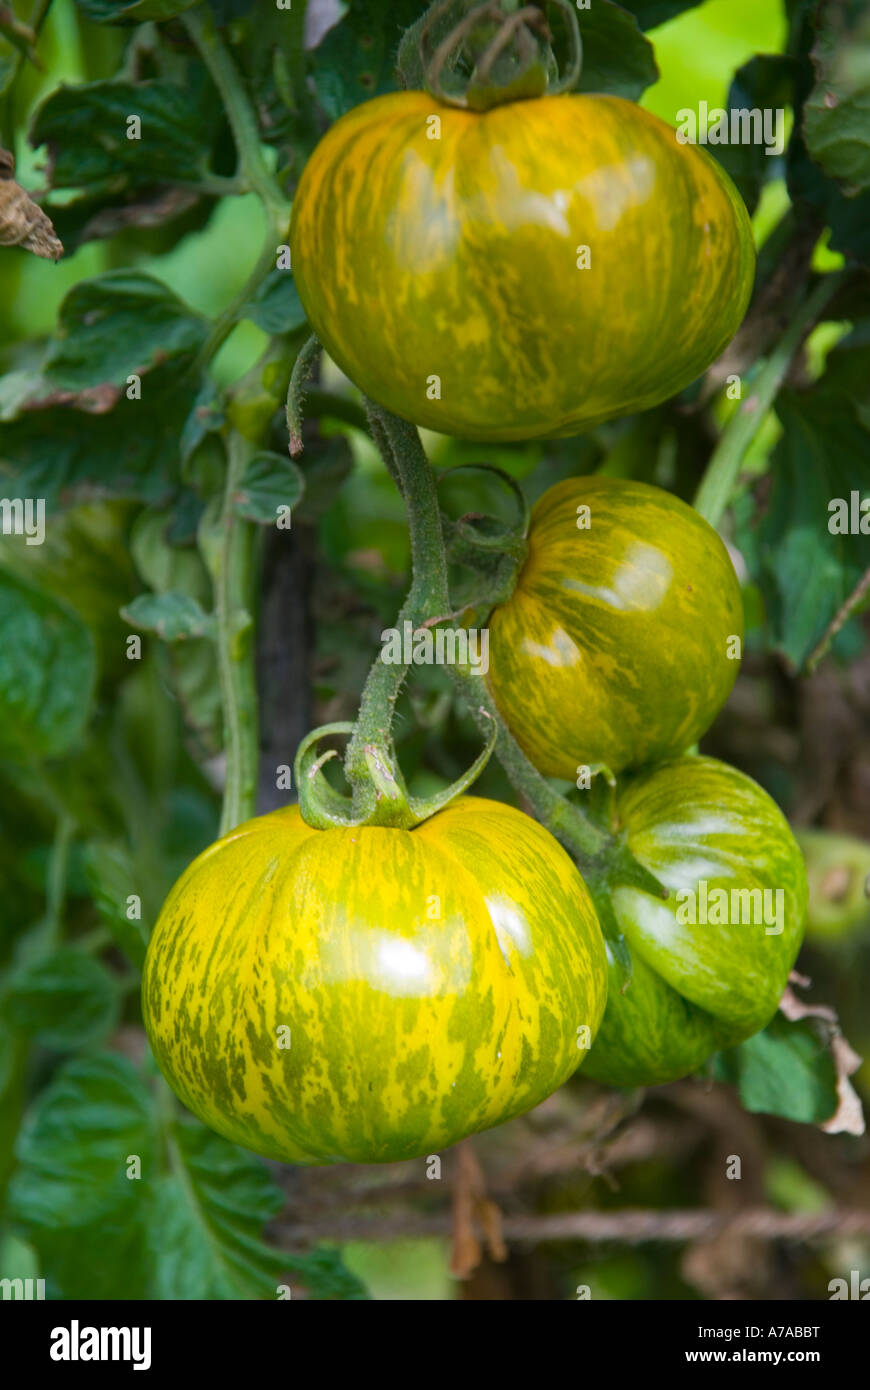 Ripe fruit of the striped variety of tomato known as Tigerella Stock Photo